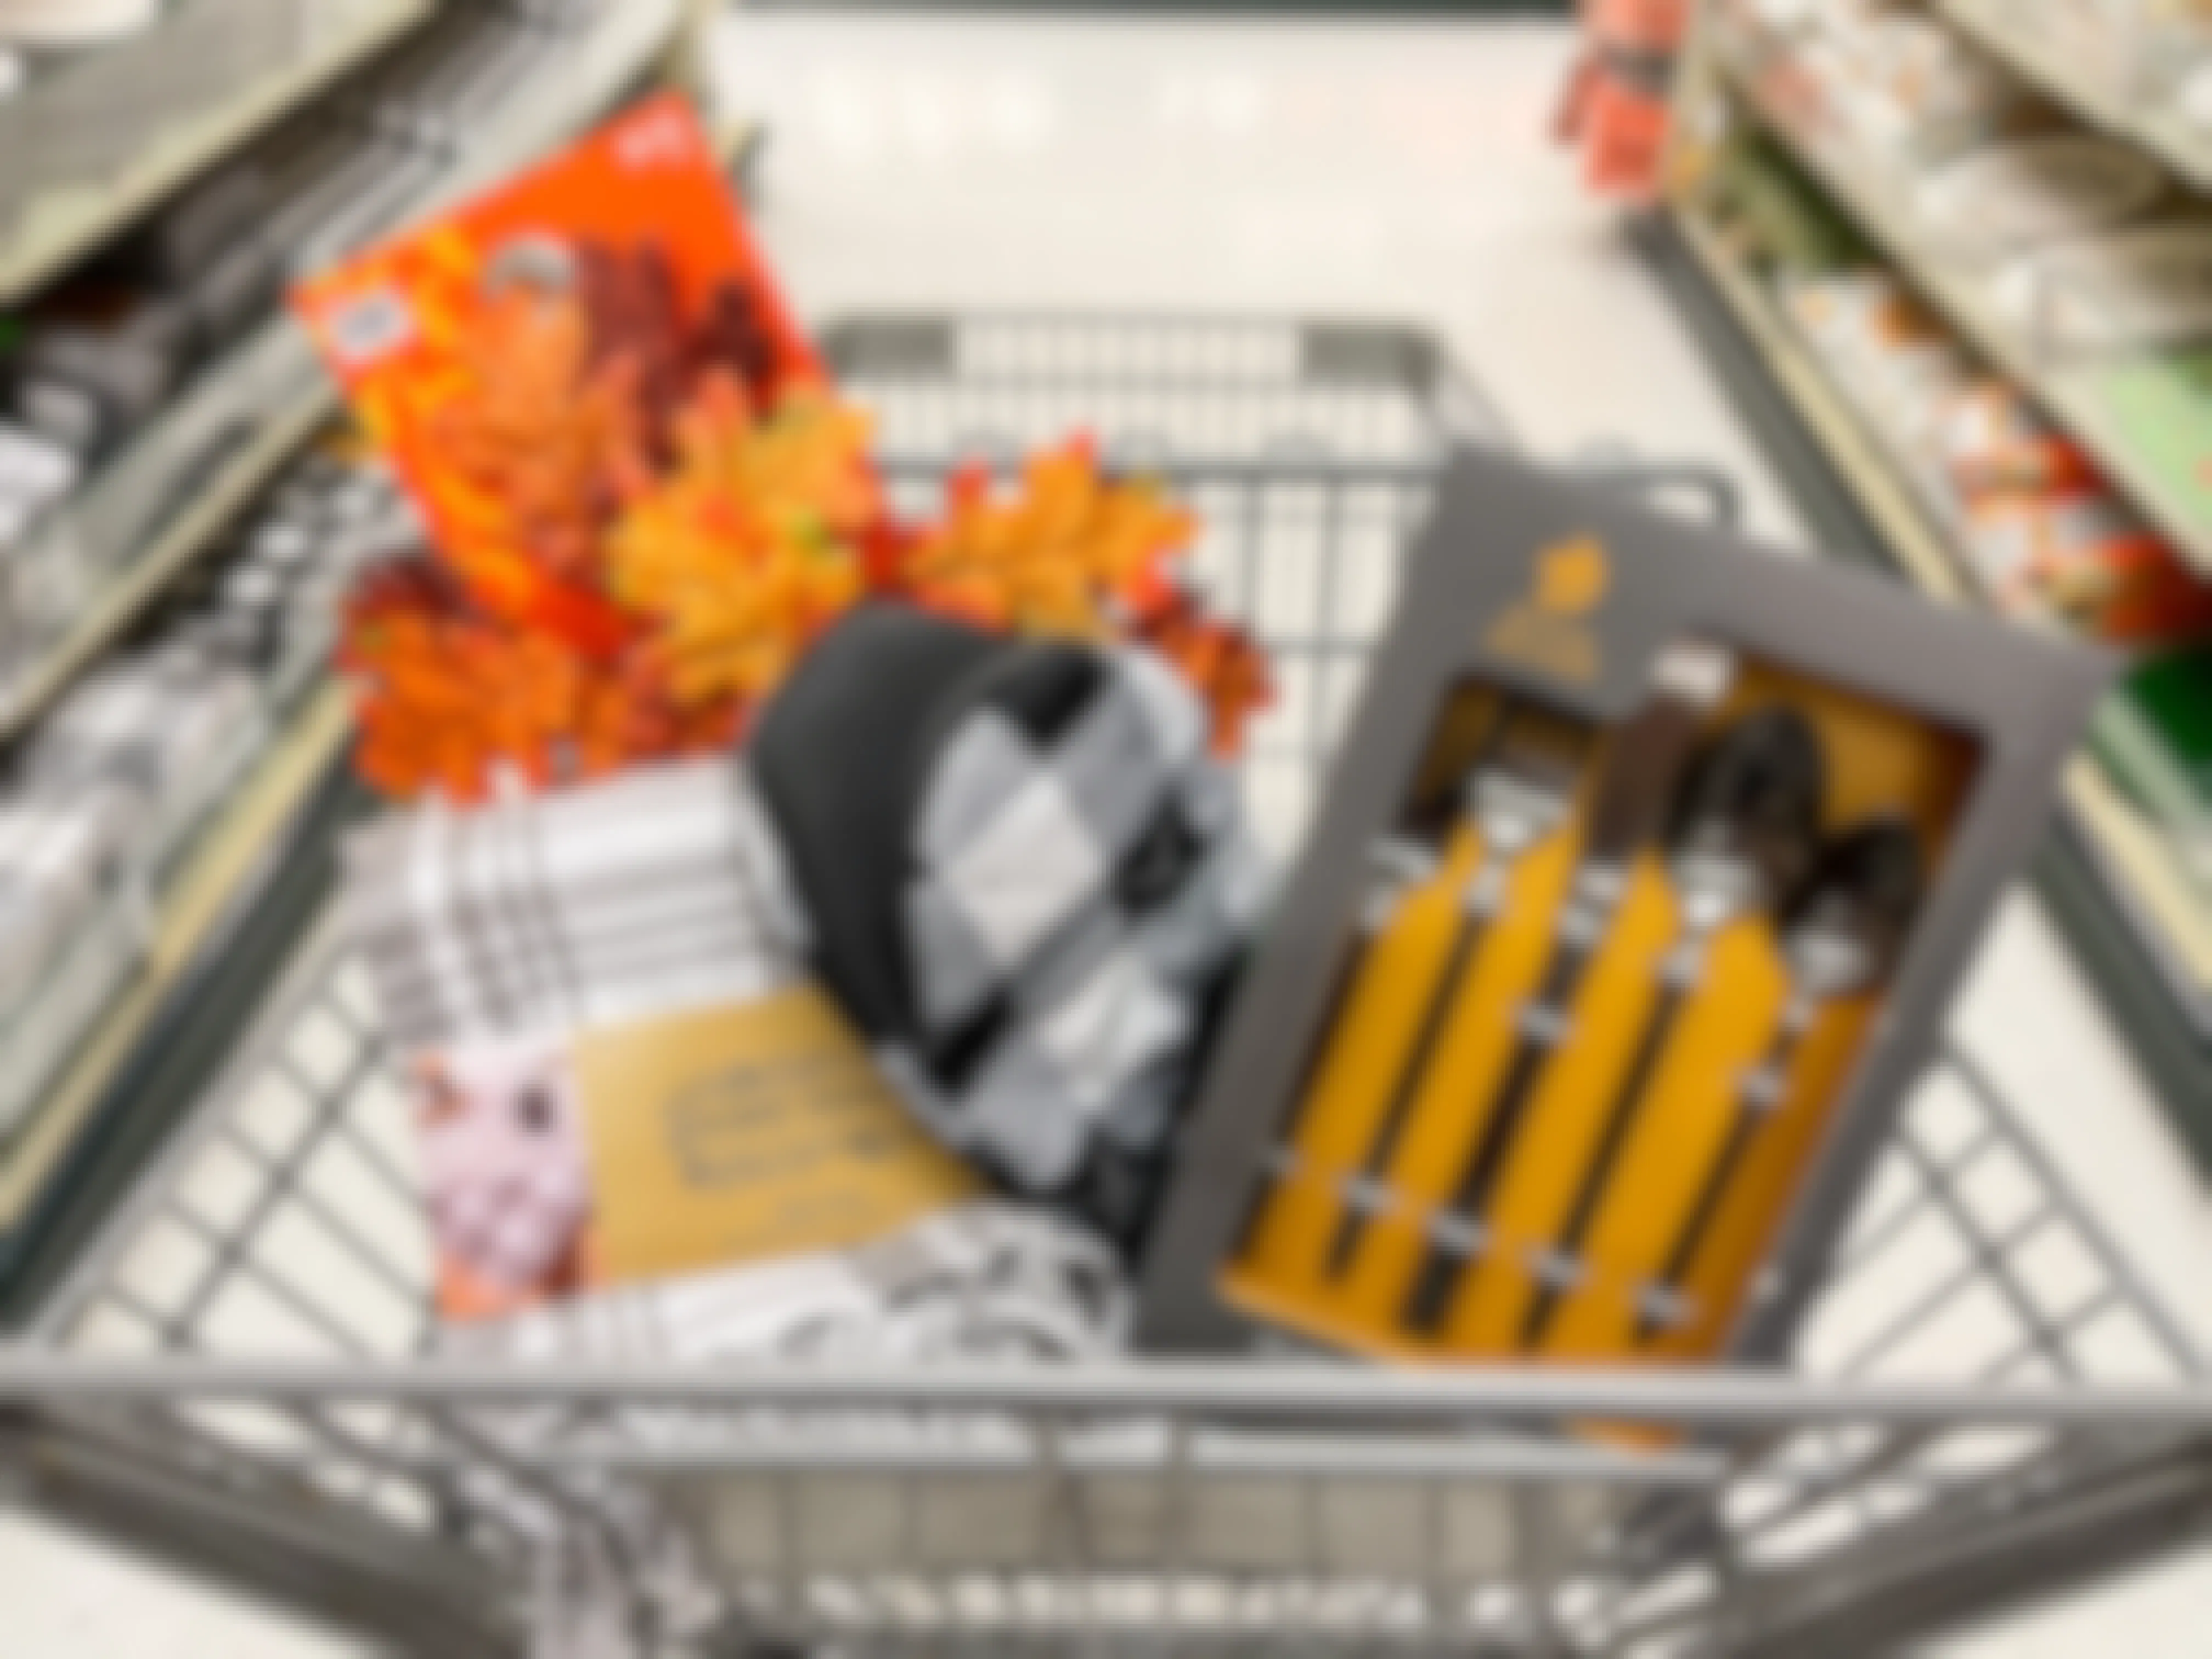 A variety of fall dining items sitting in a shopping cart.